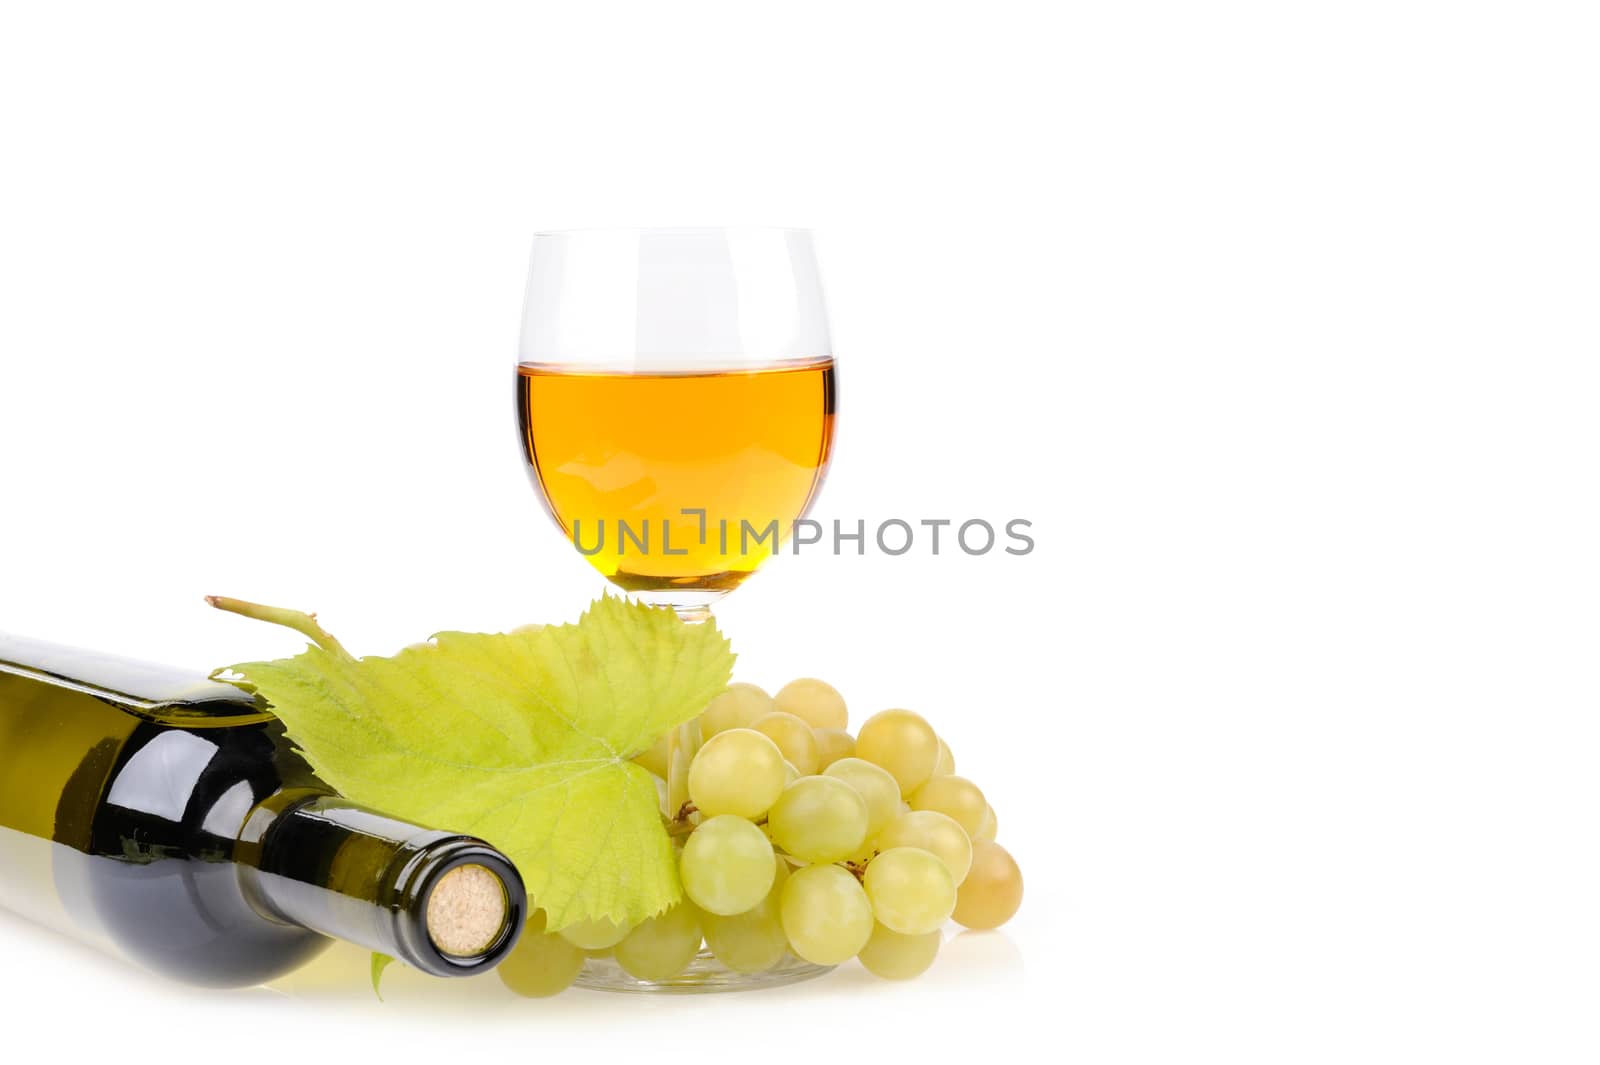 Wine bottle, glass and grapes by byrdyak